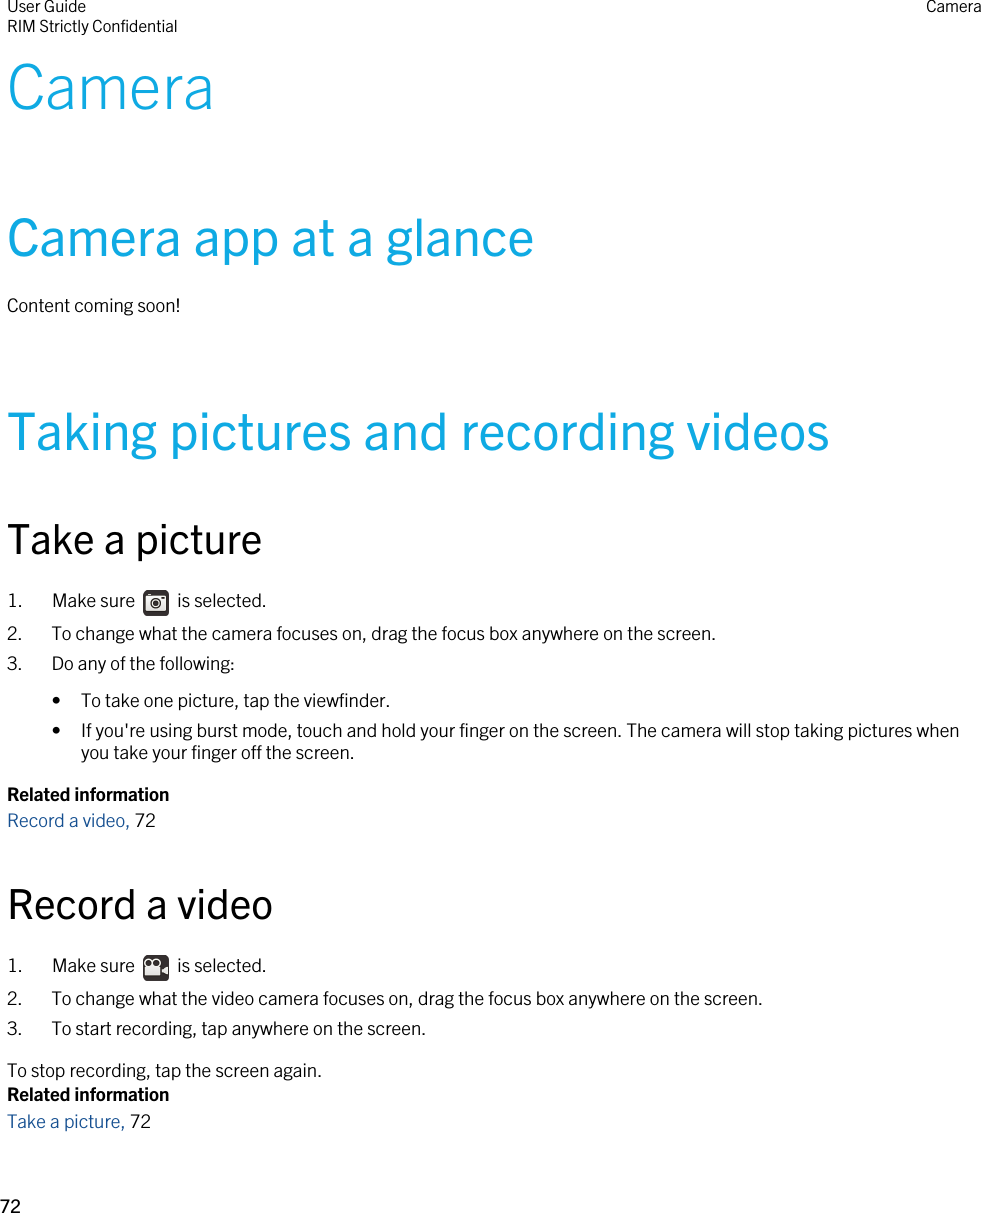 CameraCamera app at a glanceContent coming soon!Taking pictures and recording videosTake a picture1.  Make sure    is selected. 2. To change what the camera focuses on, drag the focus box anywhere on the screen.3. Do any of the following:• To take one picture, tap the viewfinder.• If you&apos;re using burst mode, touch and hold your finger on the screen. The camera will stop taking pictures when you take your finger off the screen.Related informationRecord a video, 72Record a video1.  Make sure    is selected. 2. To change what the video camera focuses on, drag the focus box anywhere on the screen.3. To start recording, tap anywhere on the screen.To stop recording, tap the screen again.Related informationTake a picture, 72 User GuideRIM Strictly Confidential Camera72 